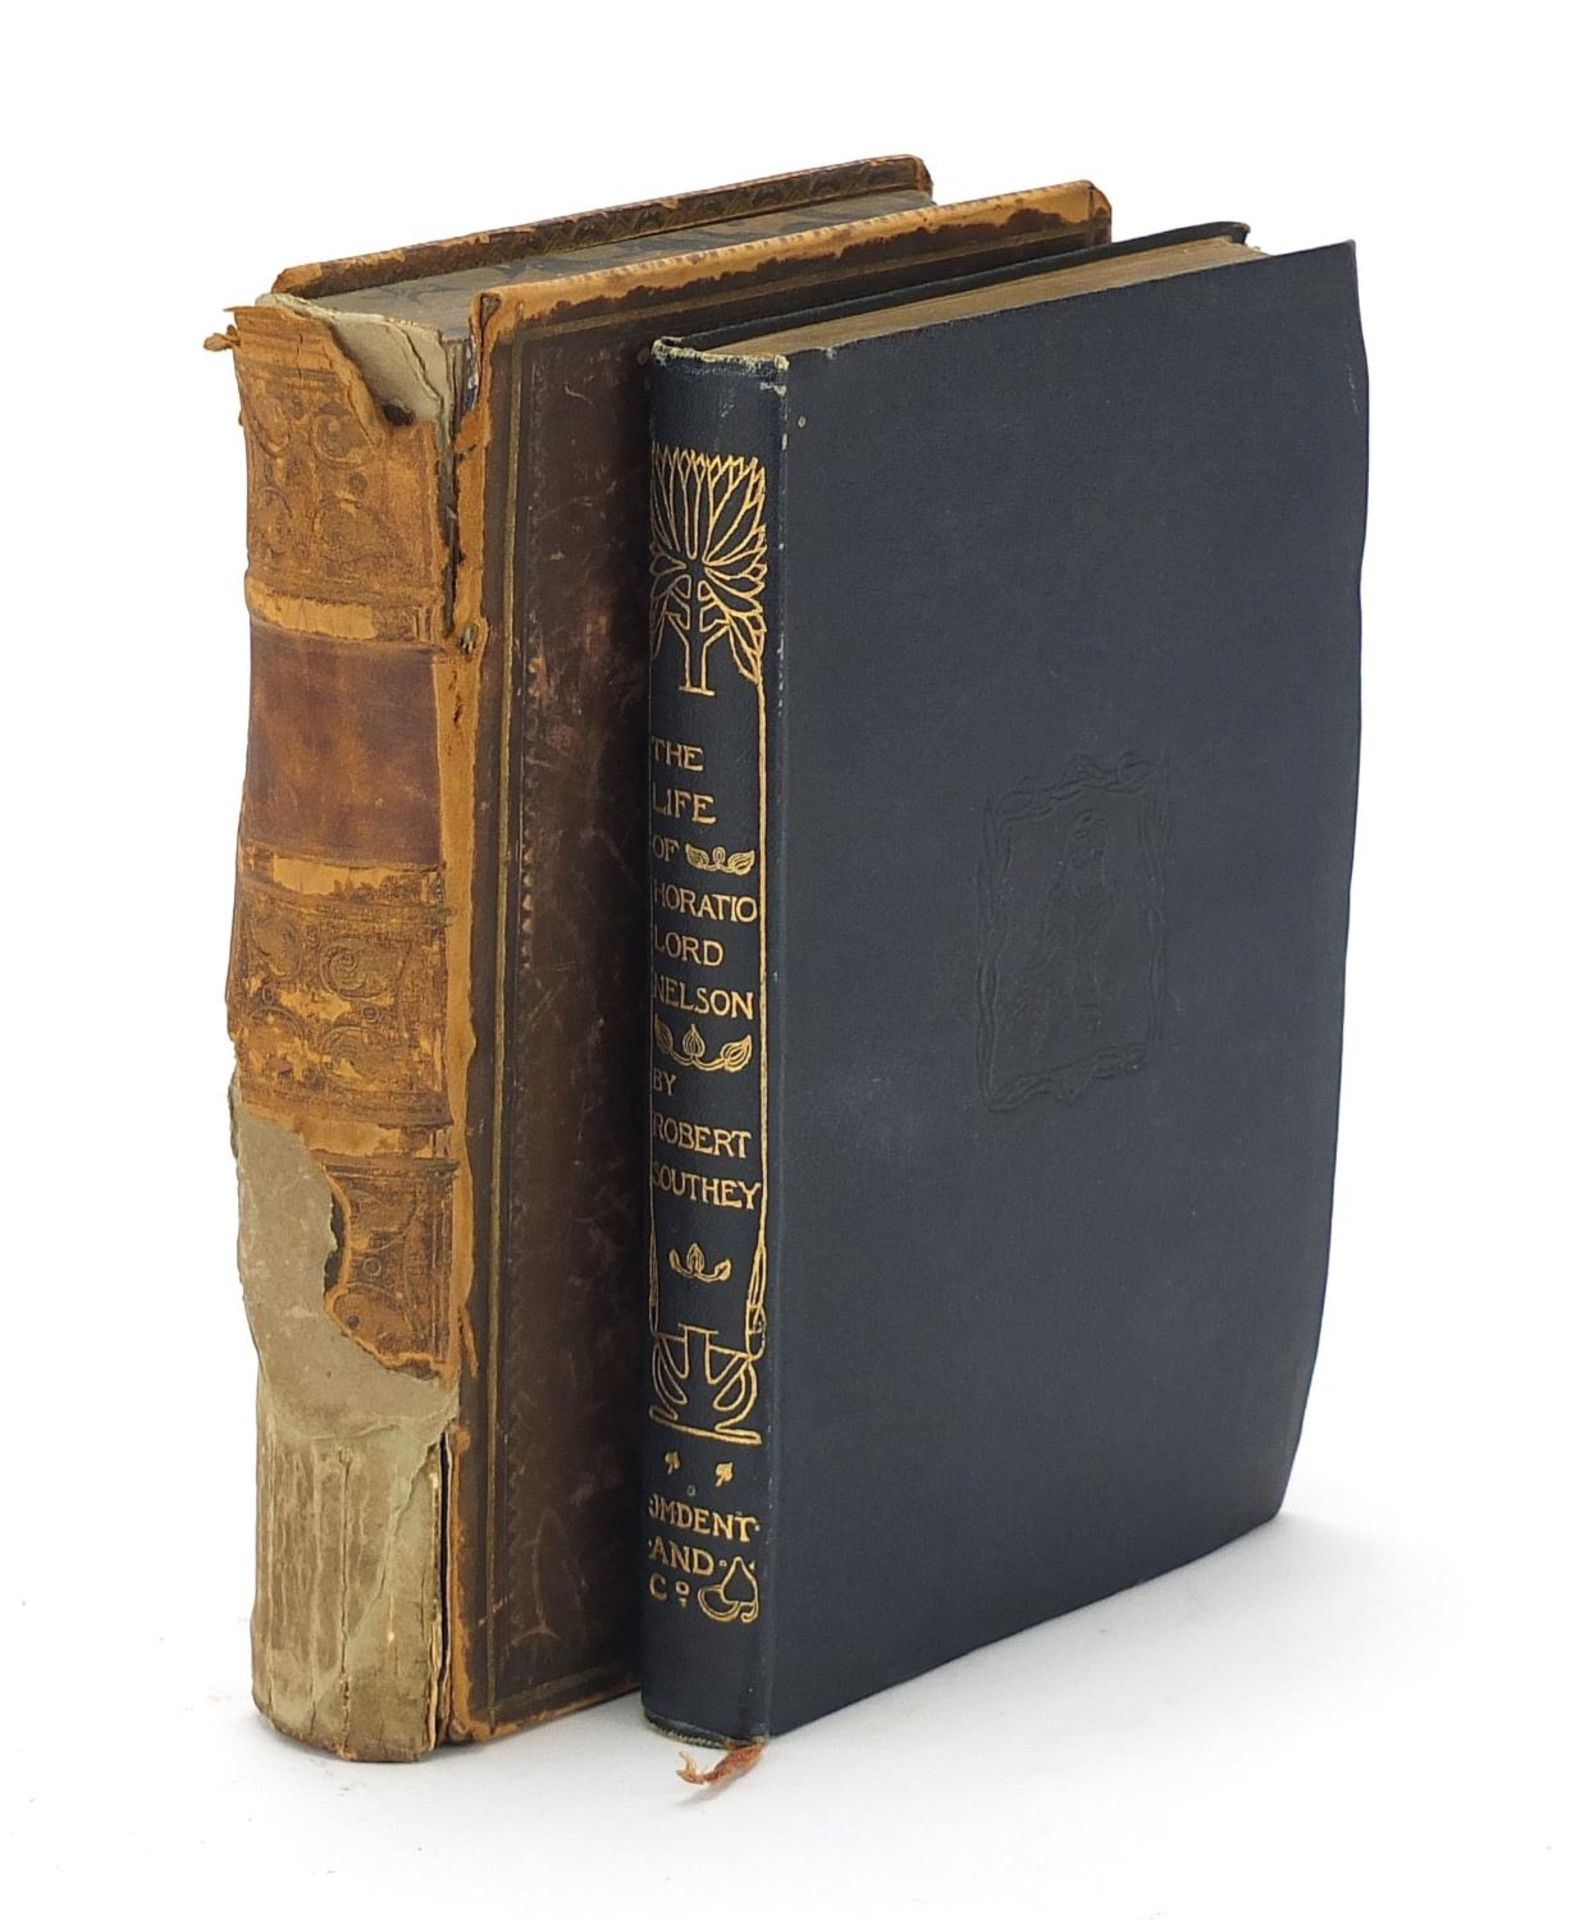 Two antique hardback books relating to Nelson by Robert Southey comprising The Life of Horatio